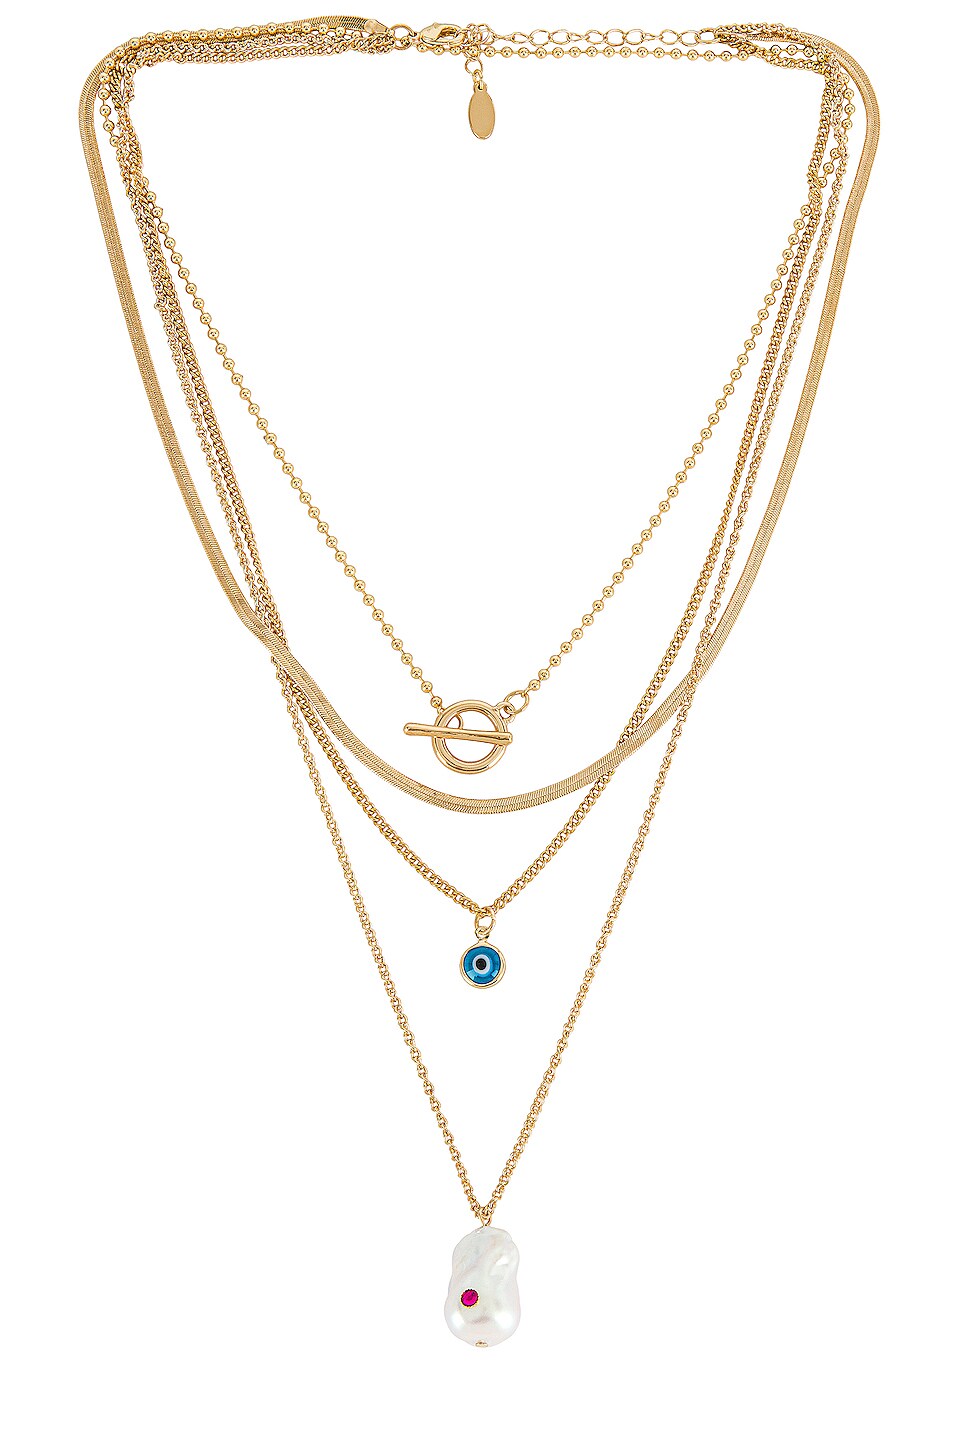 Revolve Women Accessories Jewelry Necklaces Chain Layered Necklace in Metallic Gold. 